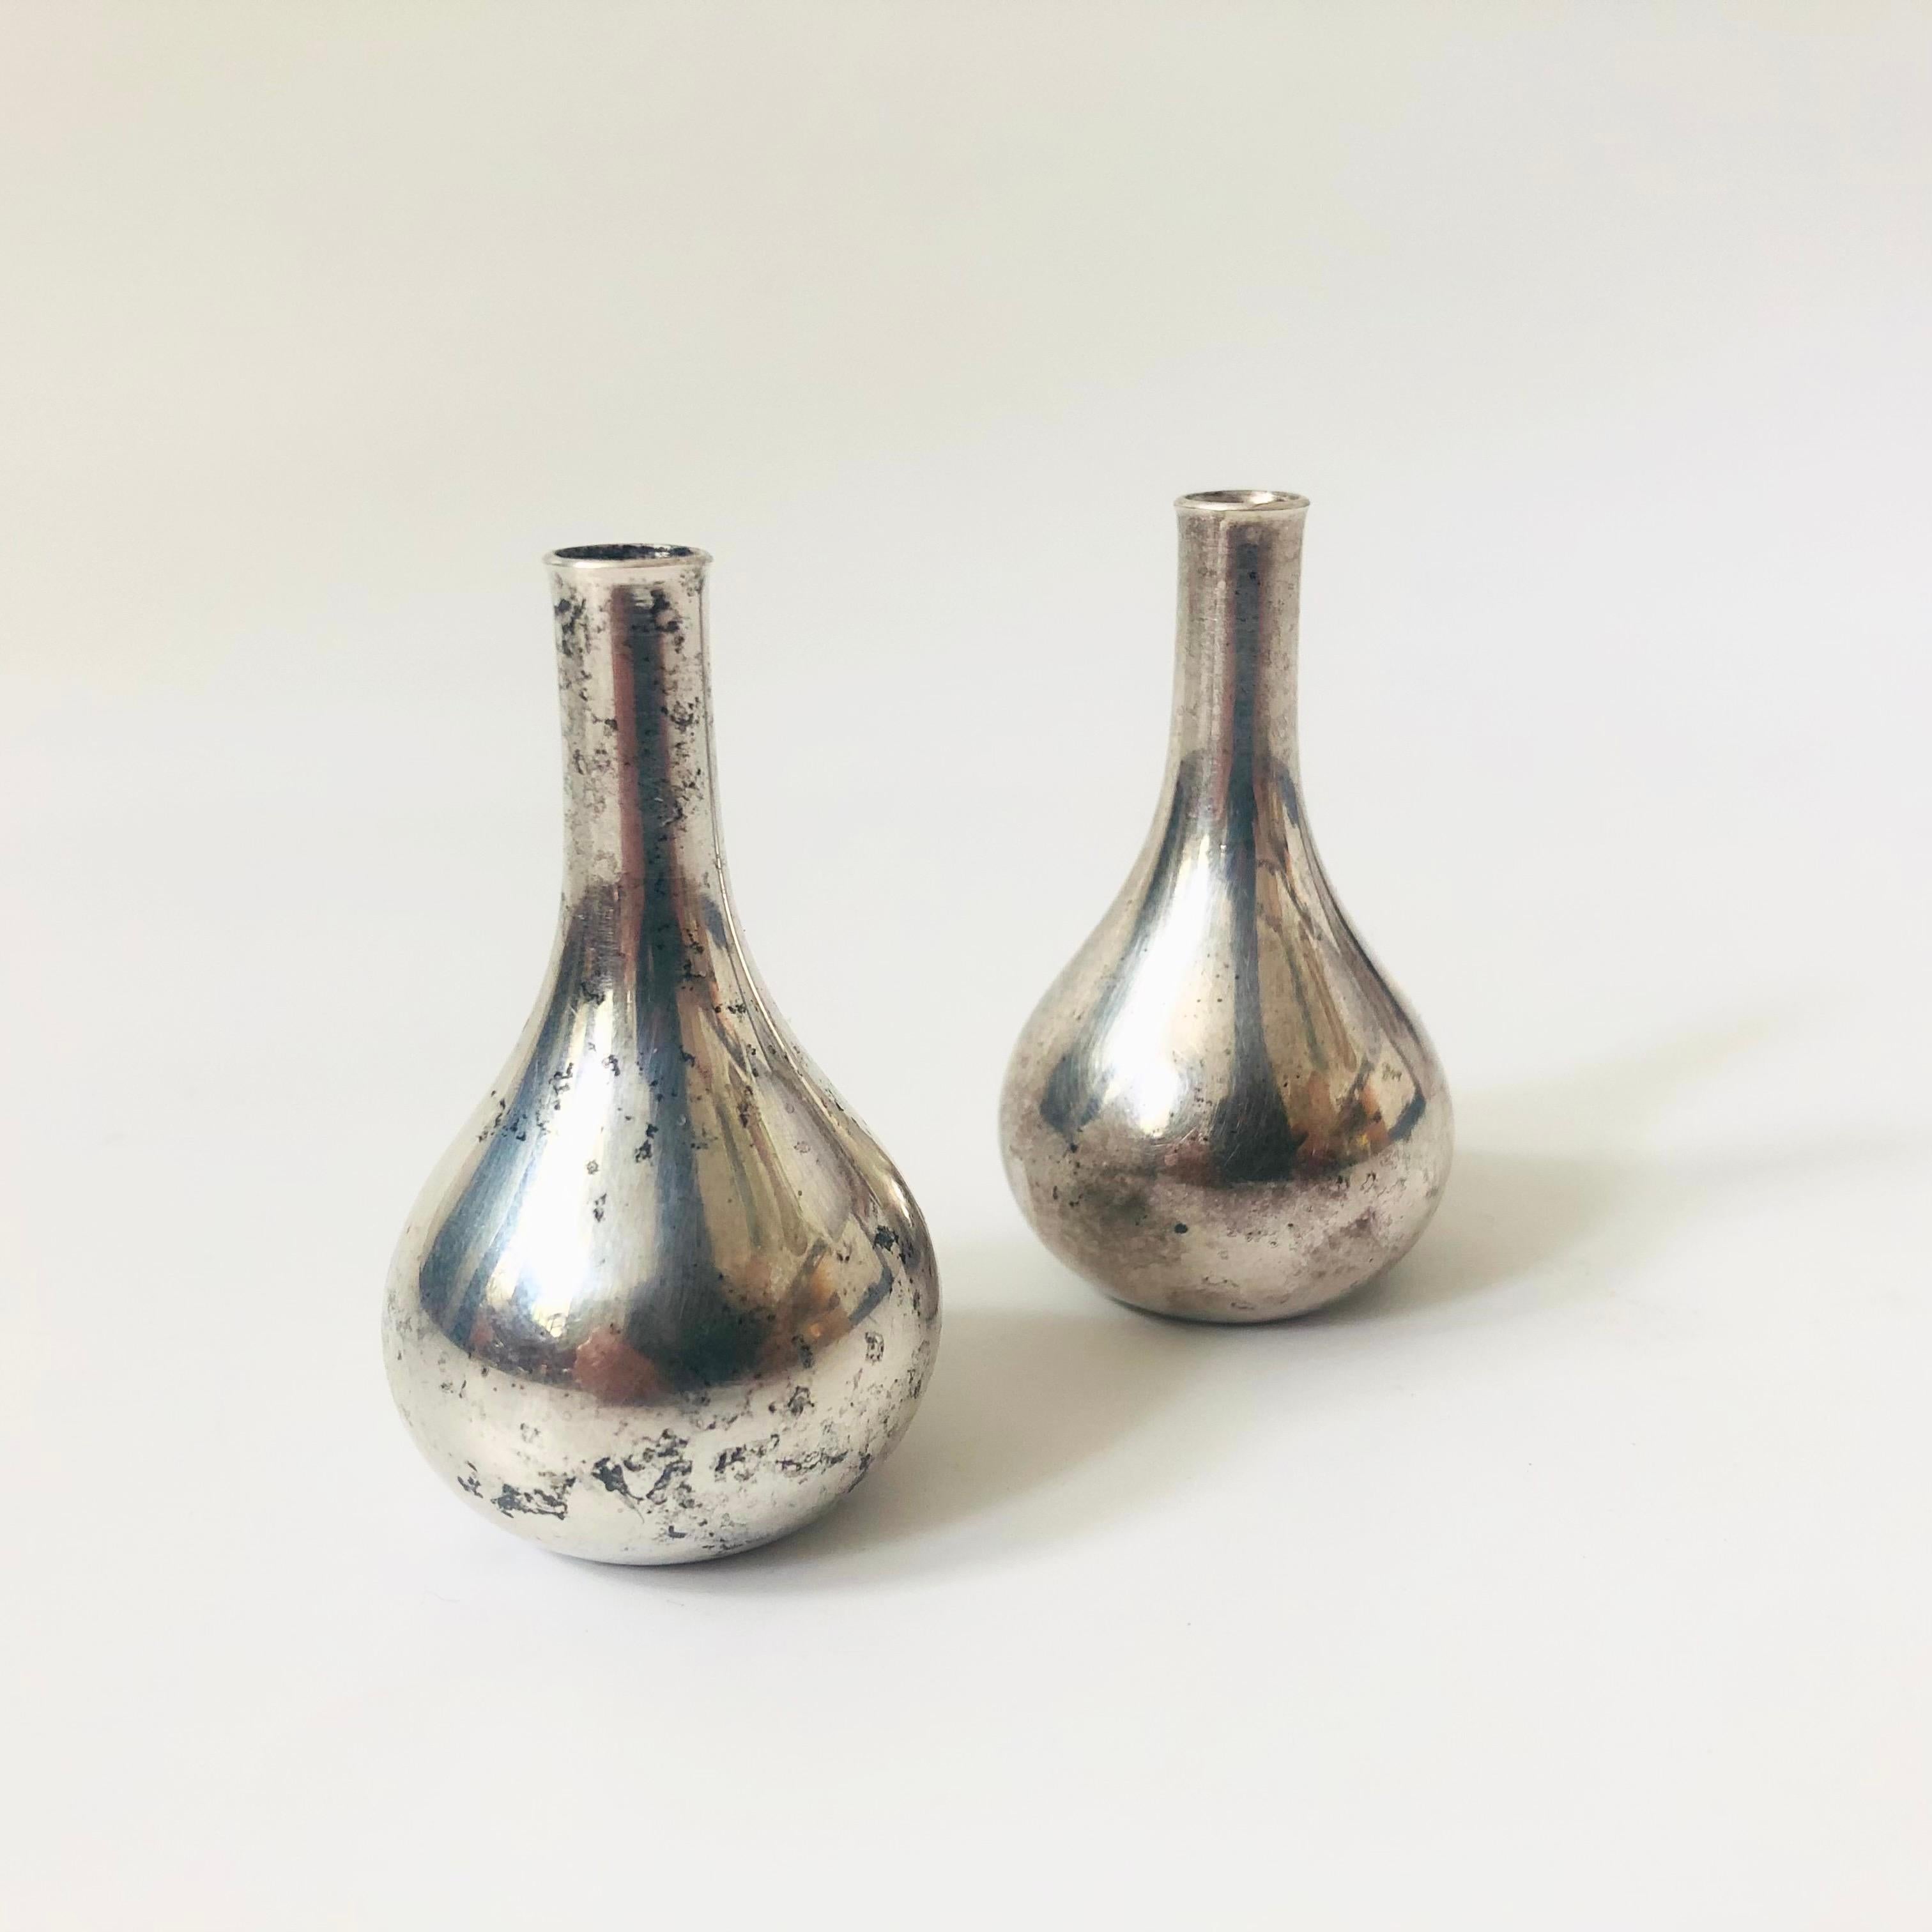 20th Century Dansk Silver Onion Tiny Taper Candle Holders by Jens Quistgaard - Set of 2 For Sale